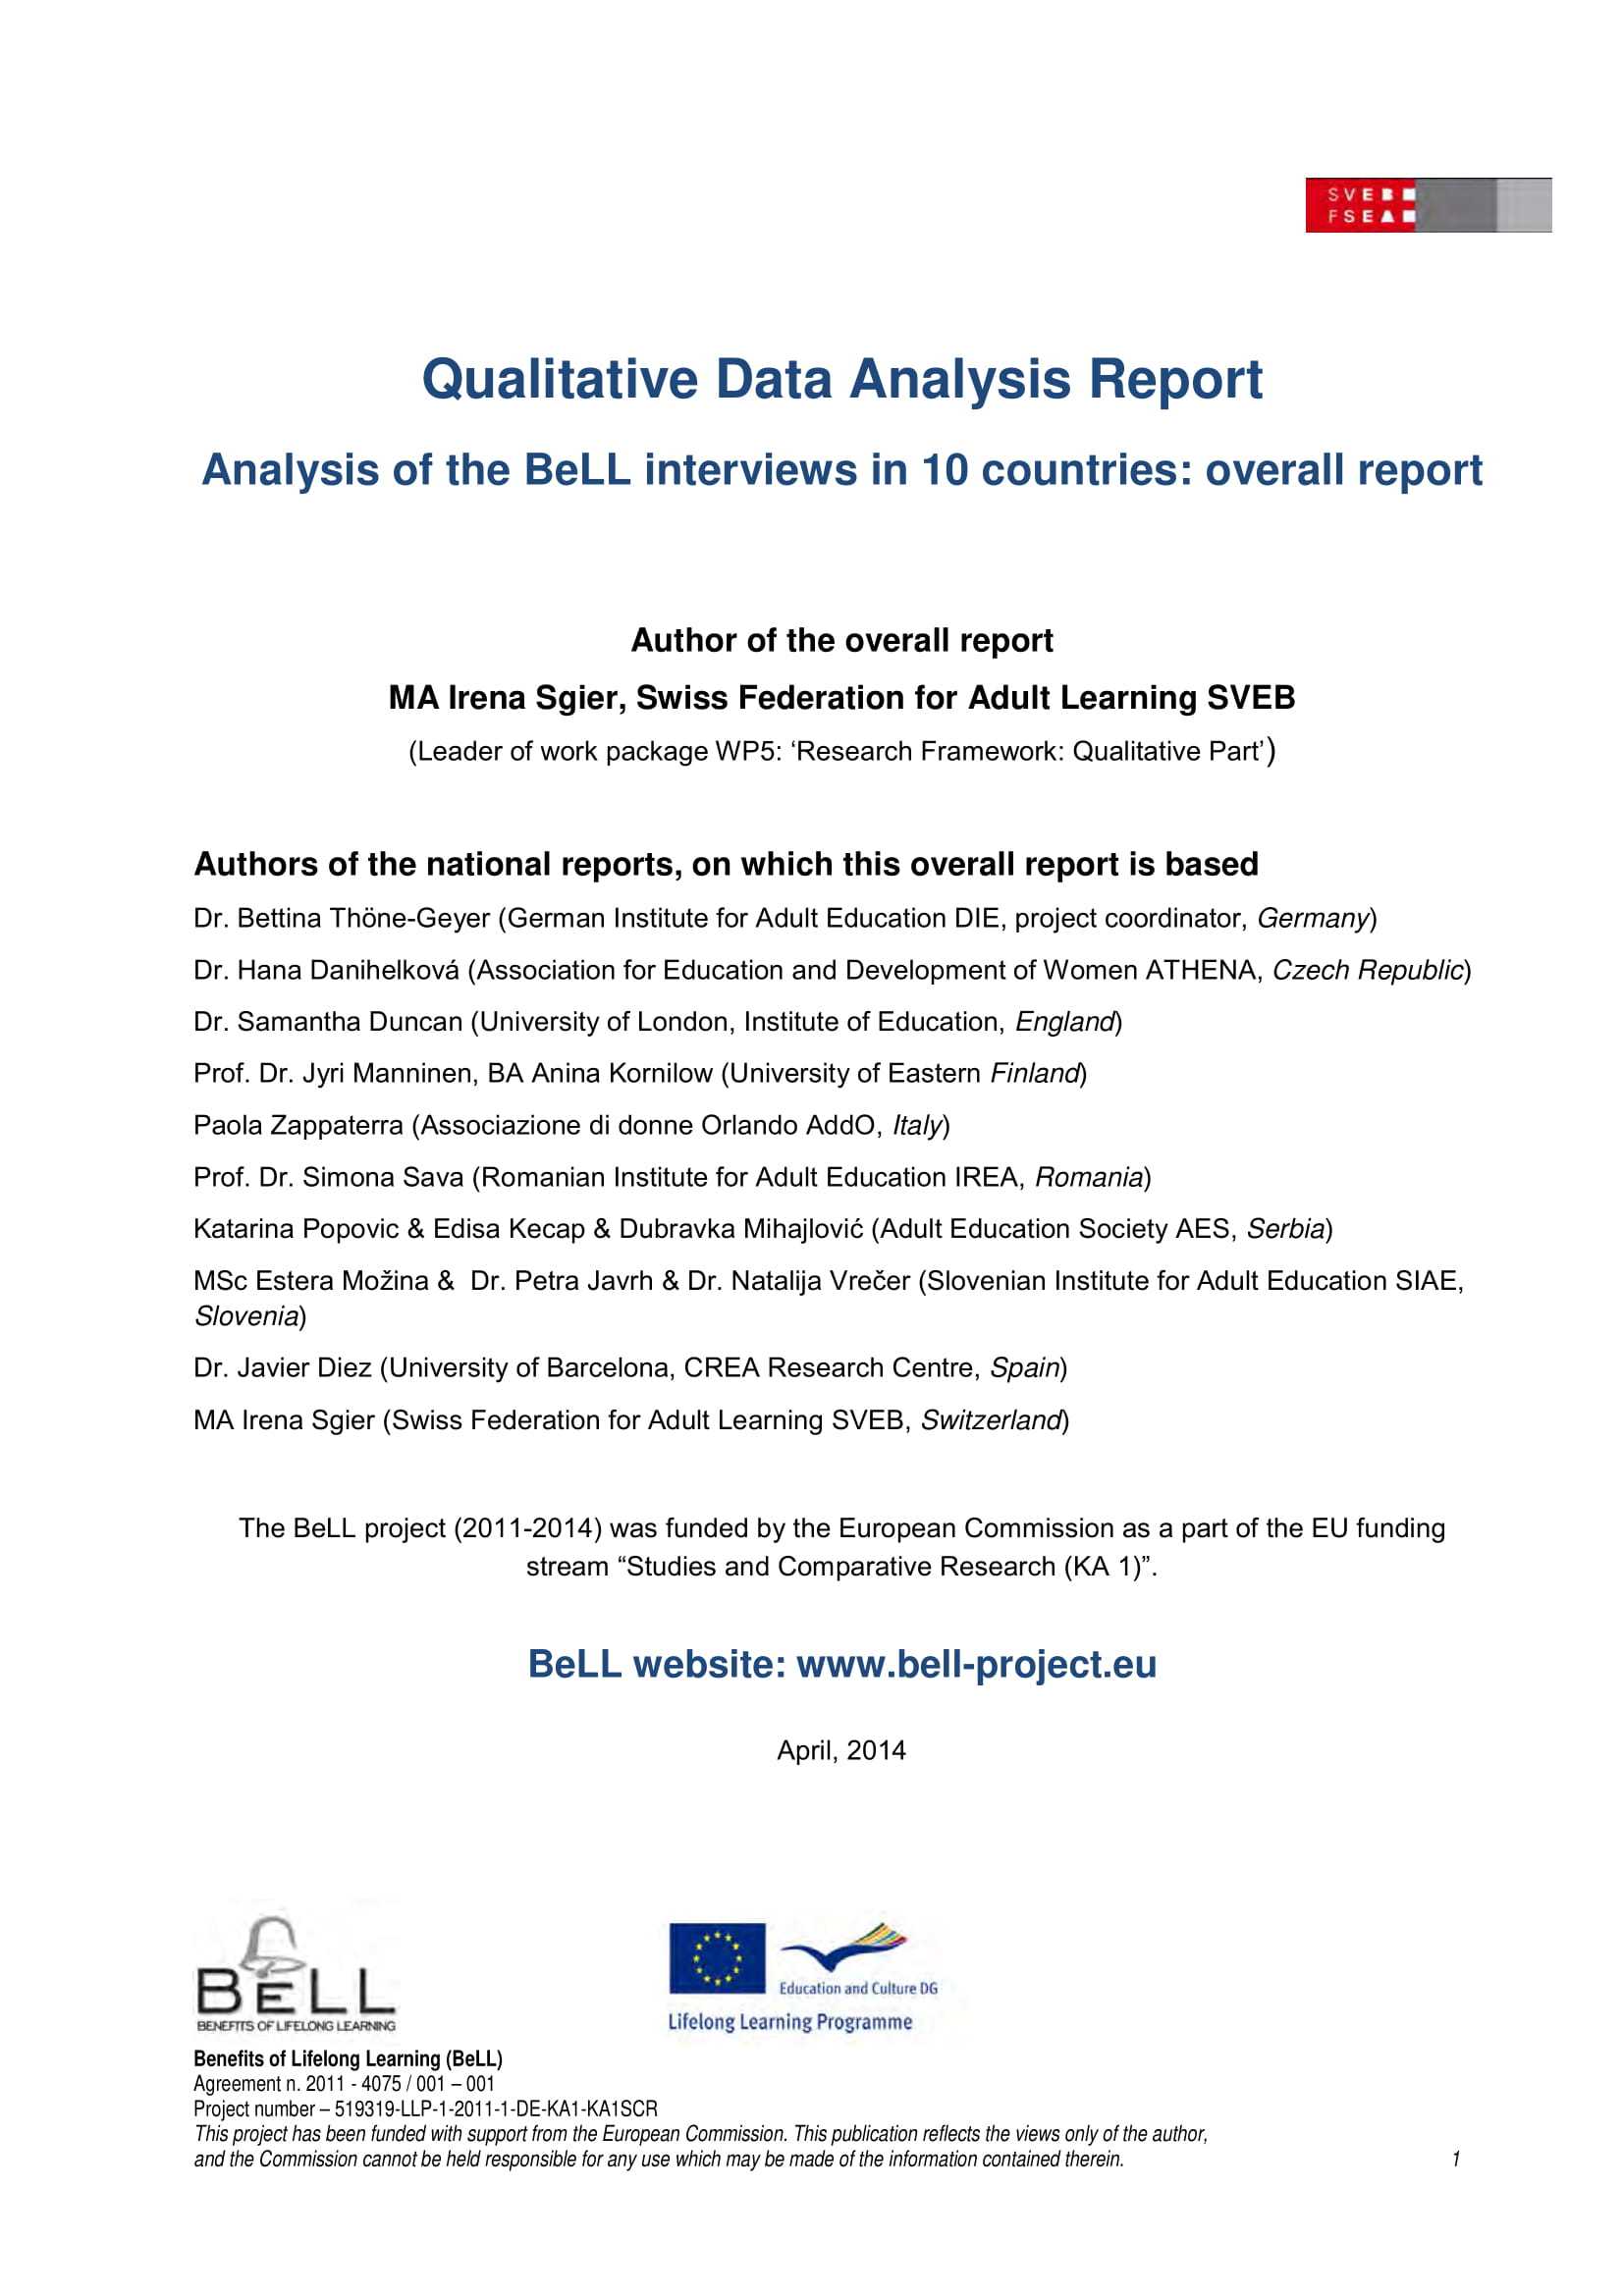 10 Data Analysis Report Examples - Pdf | Examples With Regard To Analytical Report Template